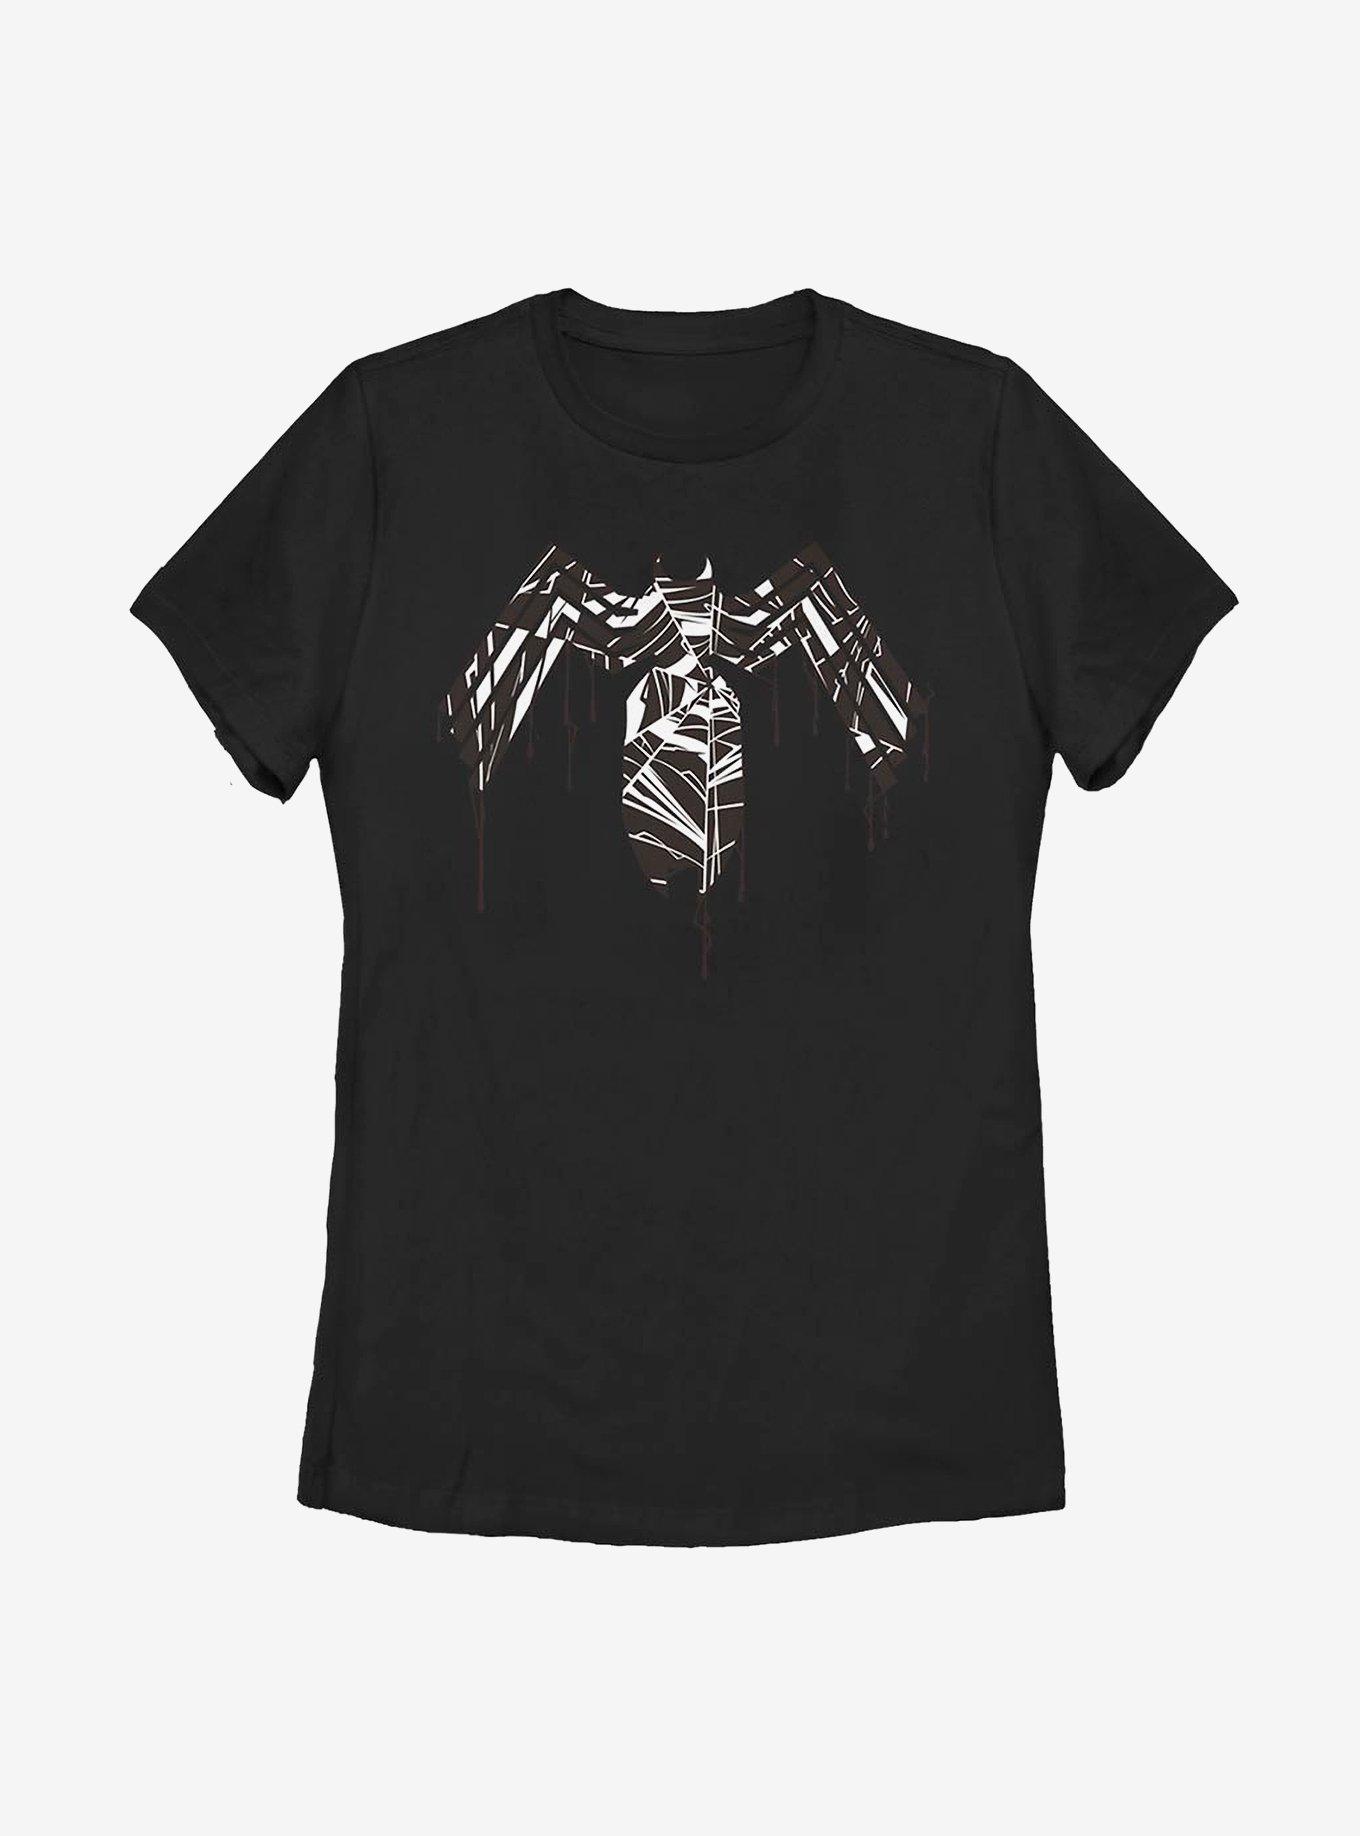 Marvel Venom: Let There Be Carnage Dripping Logo Womens T-Shirt, BLACK, hi-res